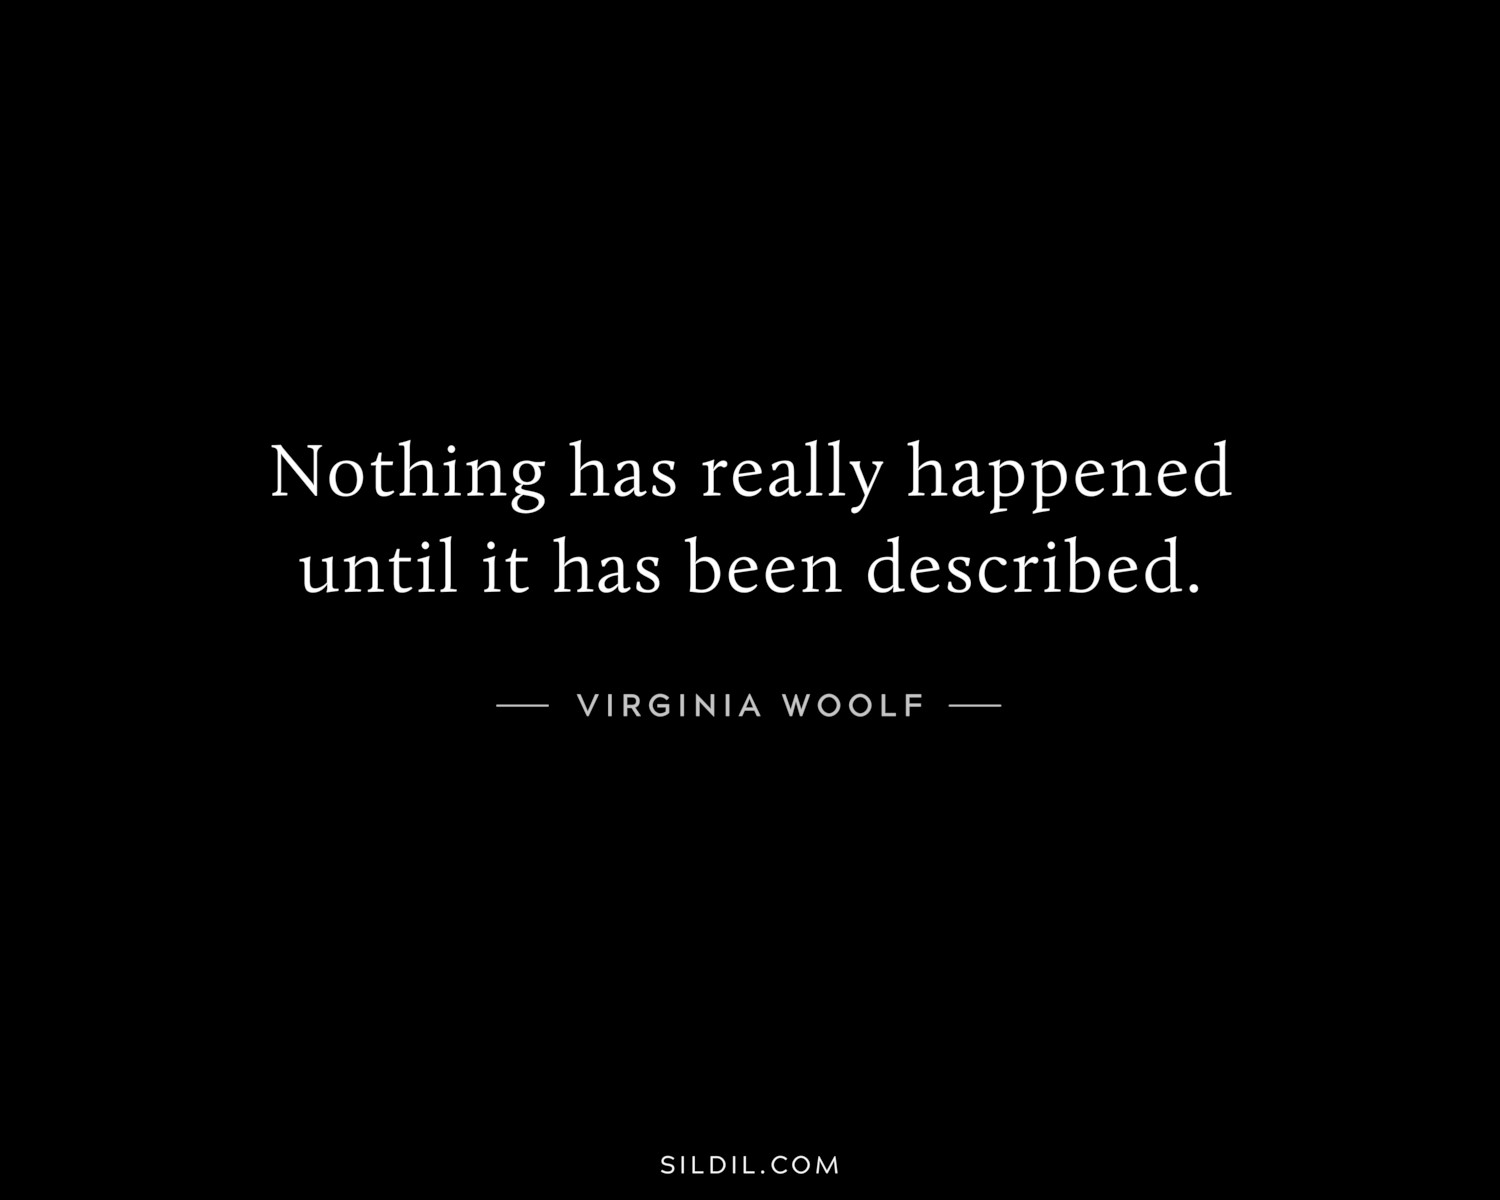 Nothing has really happened until it has been described.